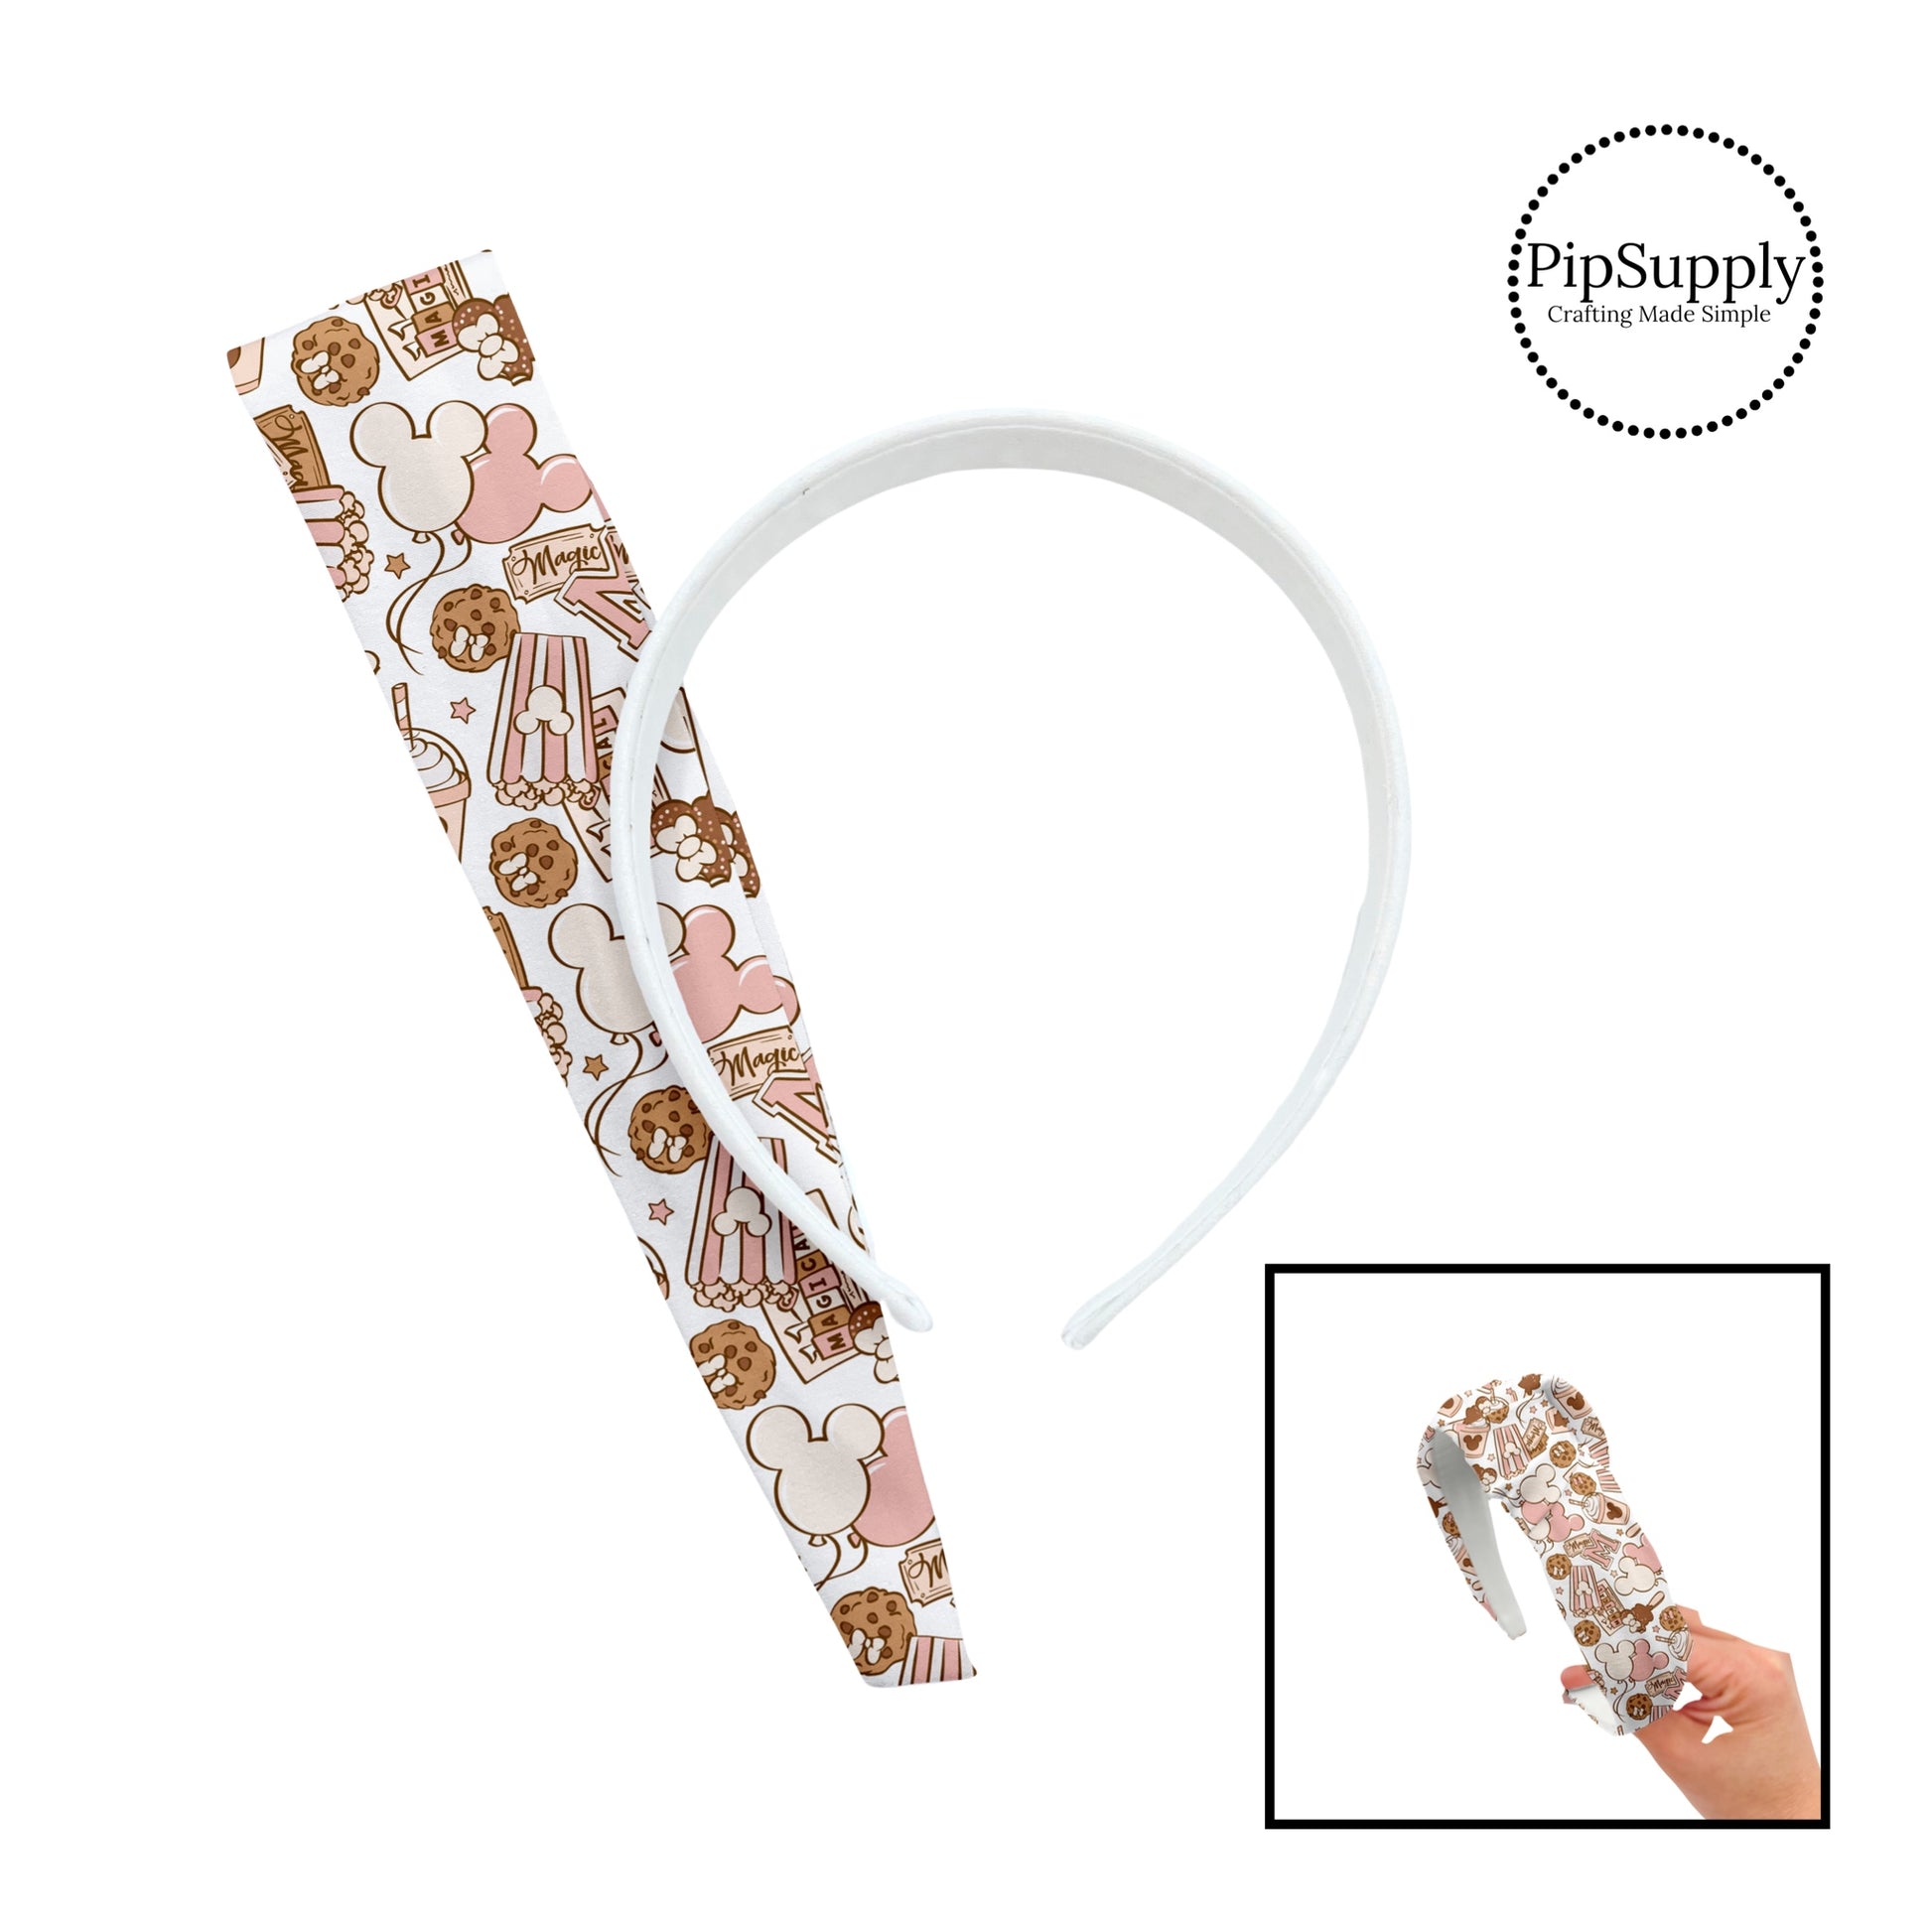 Neutral mouse park snacks and balloons on cream knotted headband kit